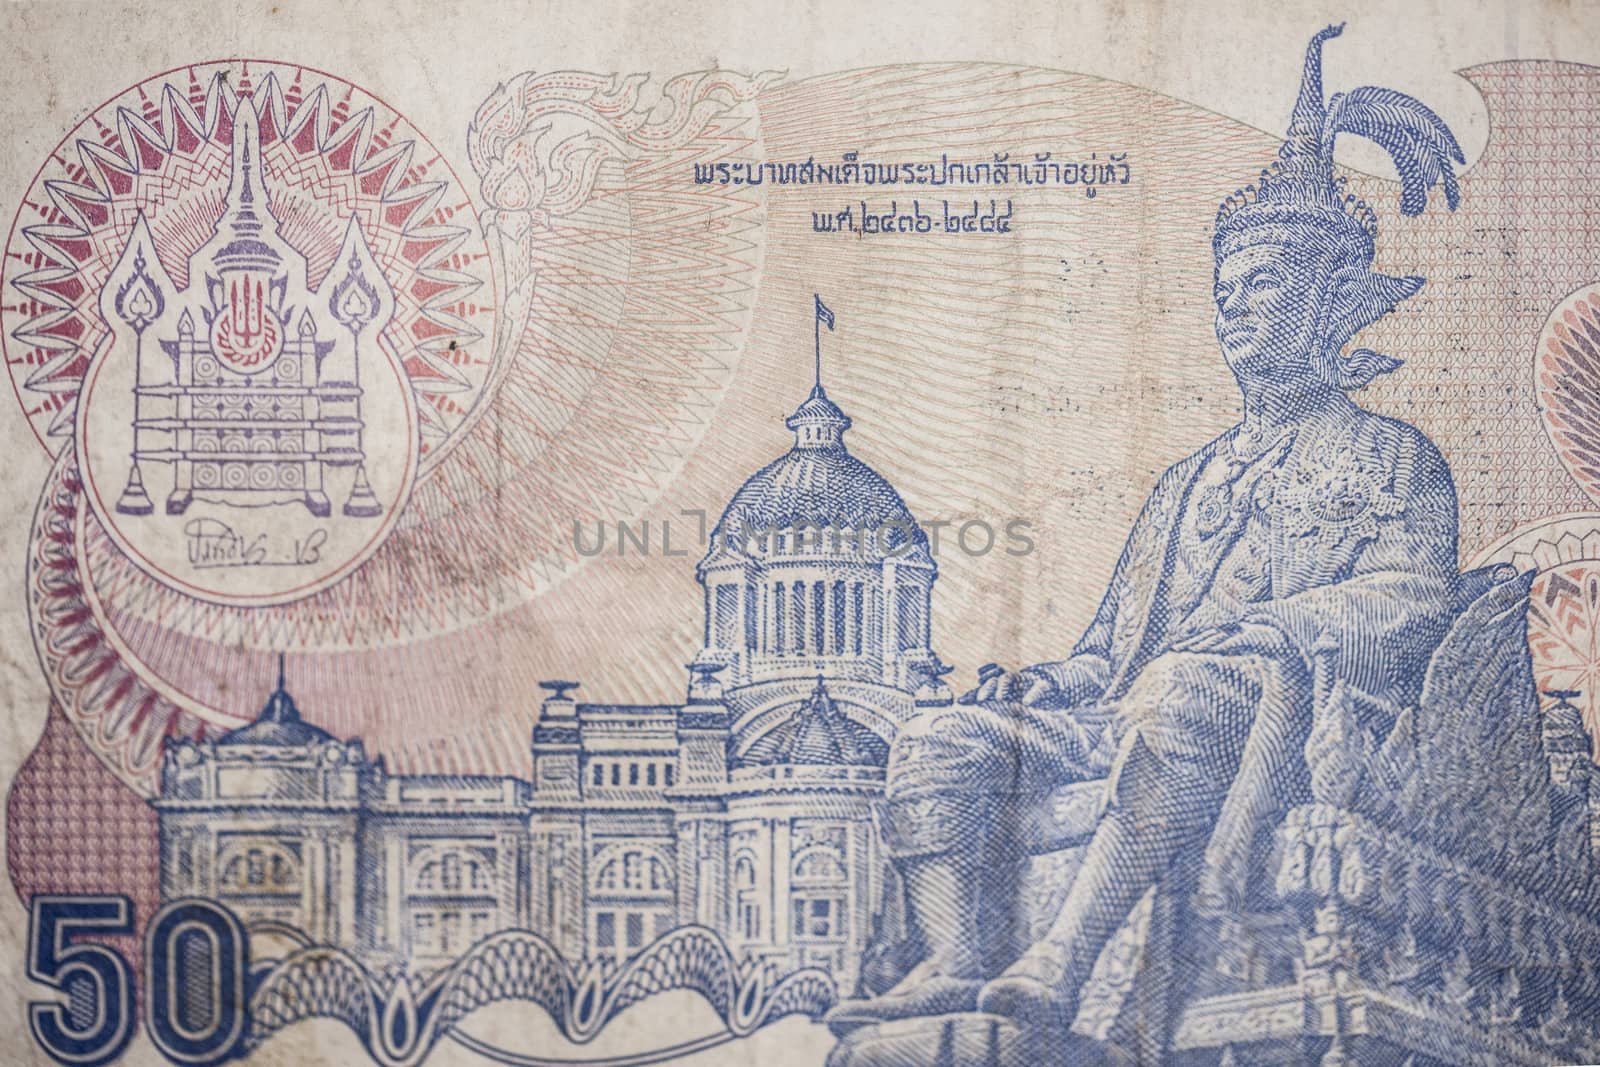 reverse of the banknote from Thailand